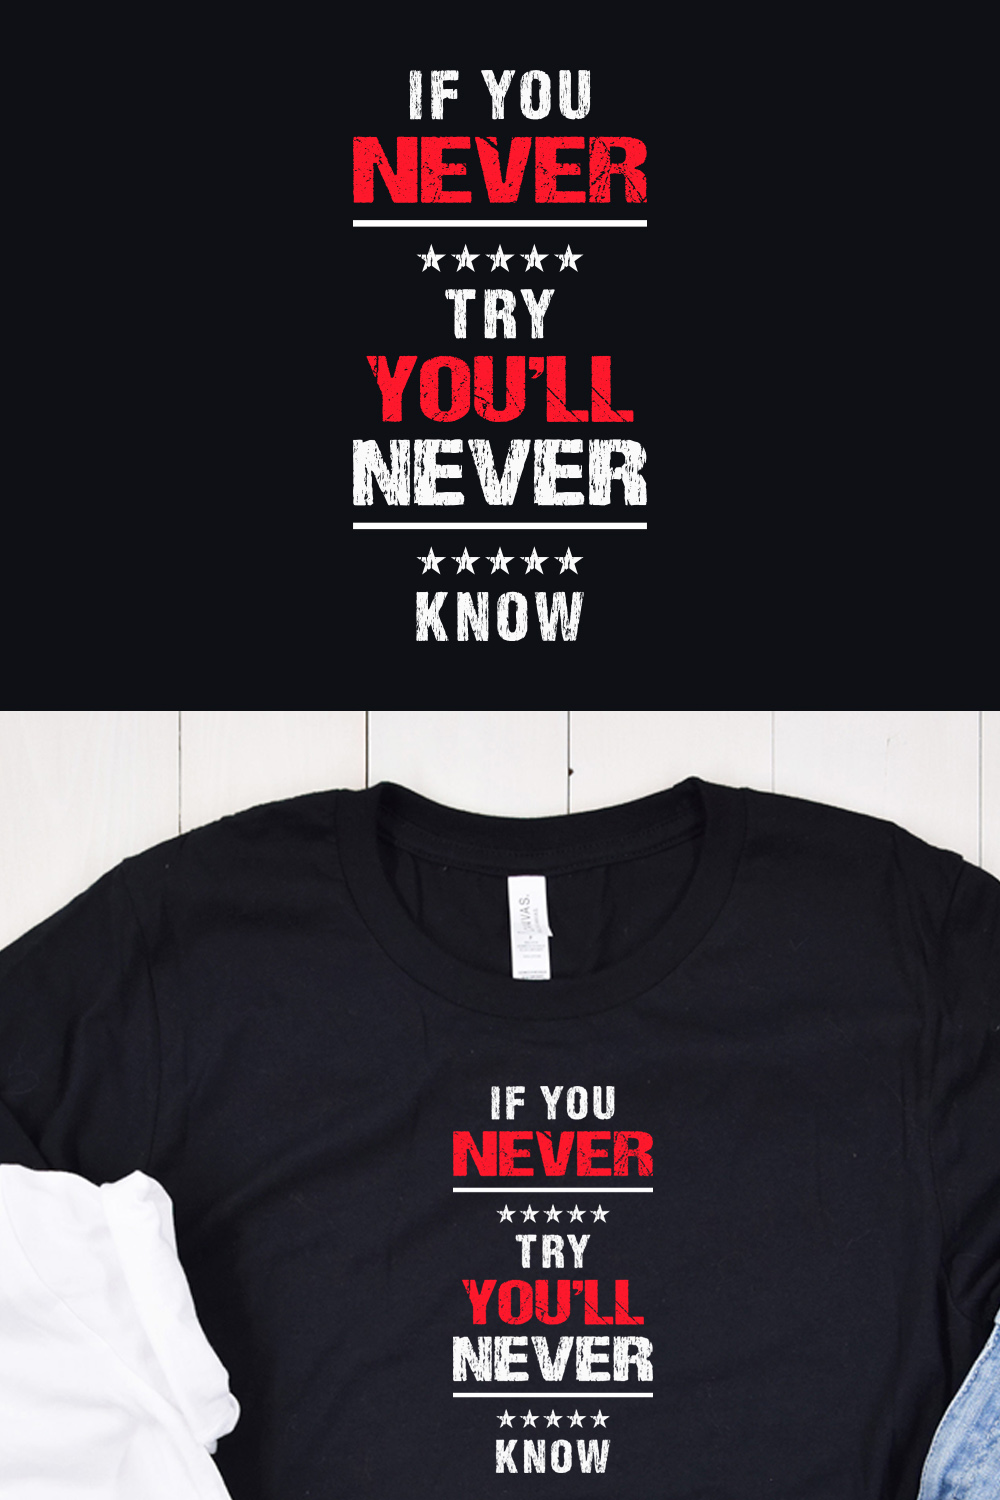 If You Never Try, You’ll Never Know Typography T-Shirt Design Pinterest Collage image.